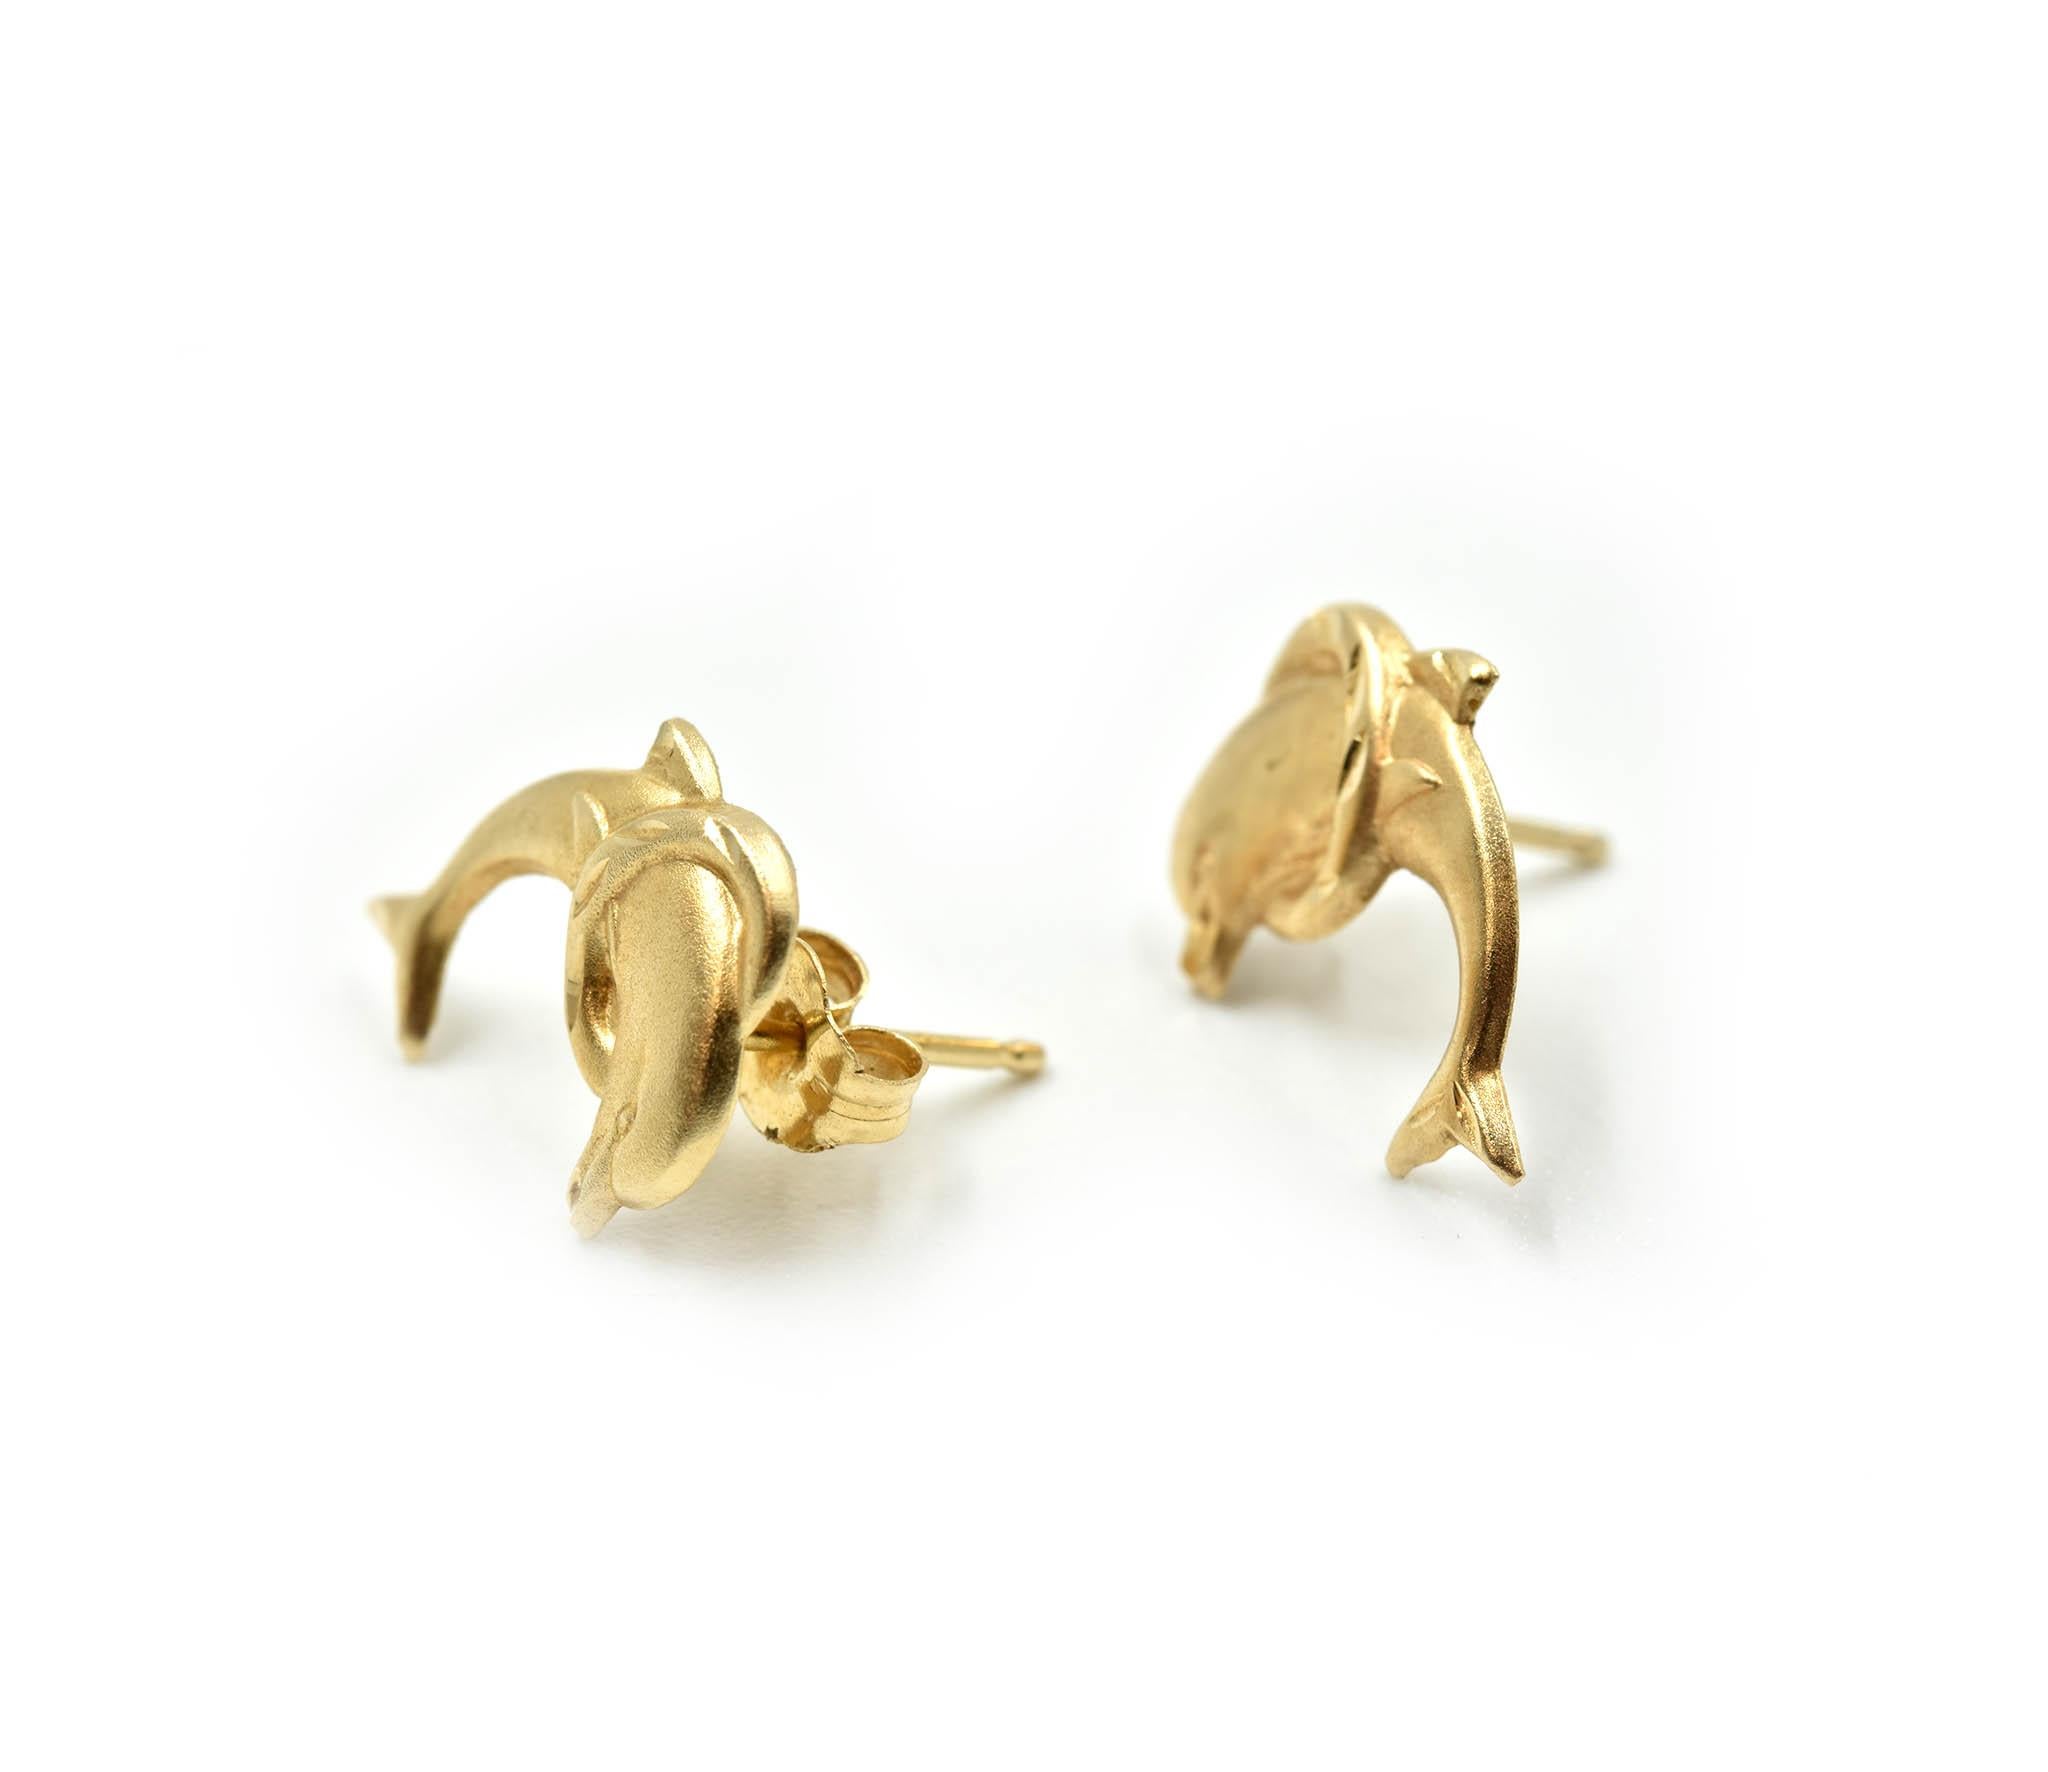 Designer: custom design
Material: 14k yellow gold
Dimensions: each dolphin stud measures a 1/2-inch in length and 3/8-inches wide
Fastenings: friction backs
Weight: 0.30 grams
